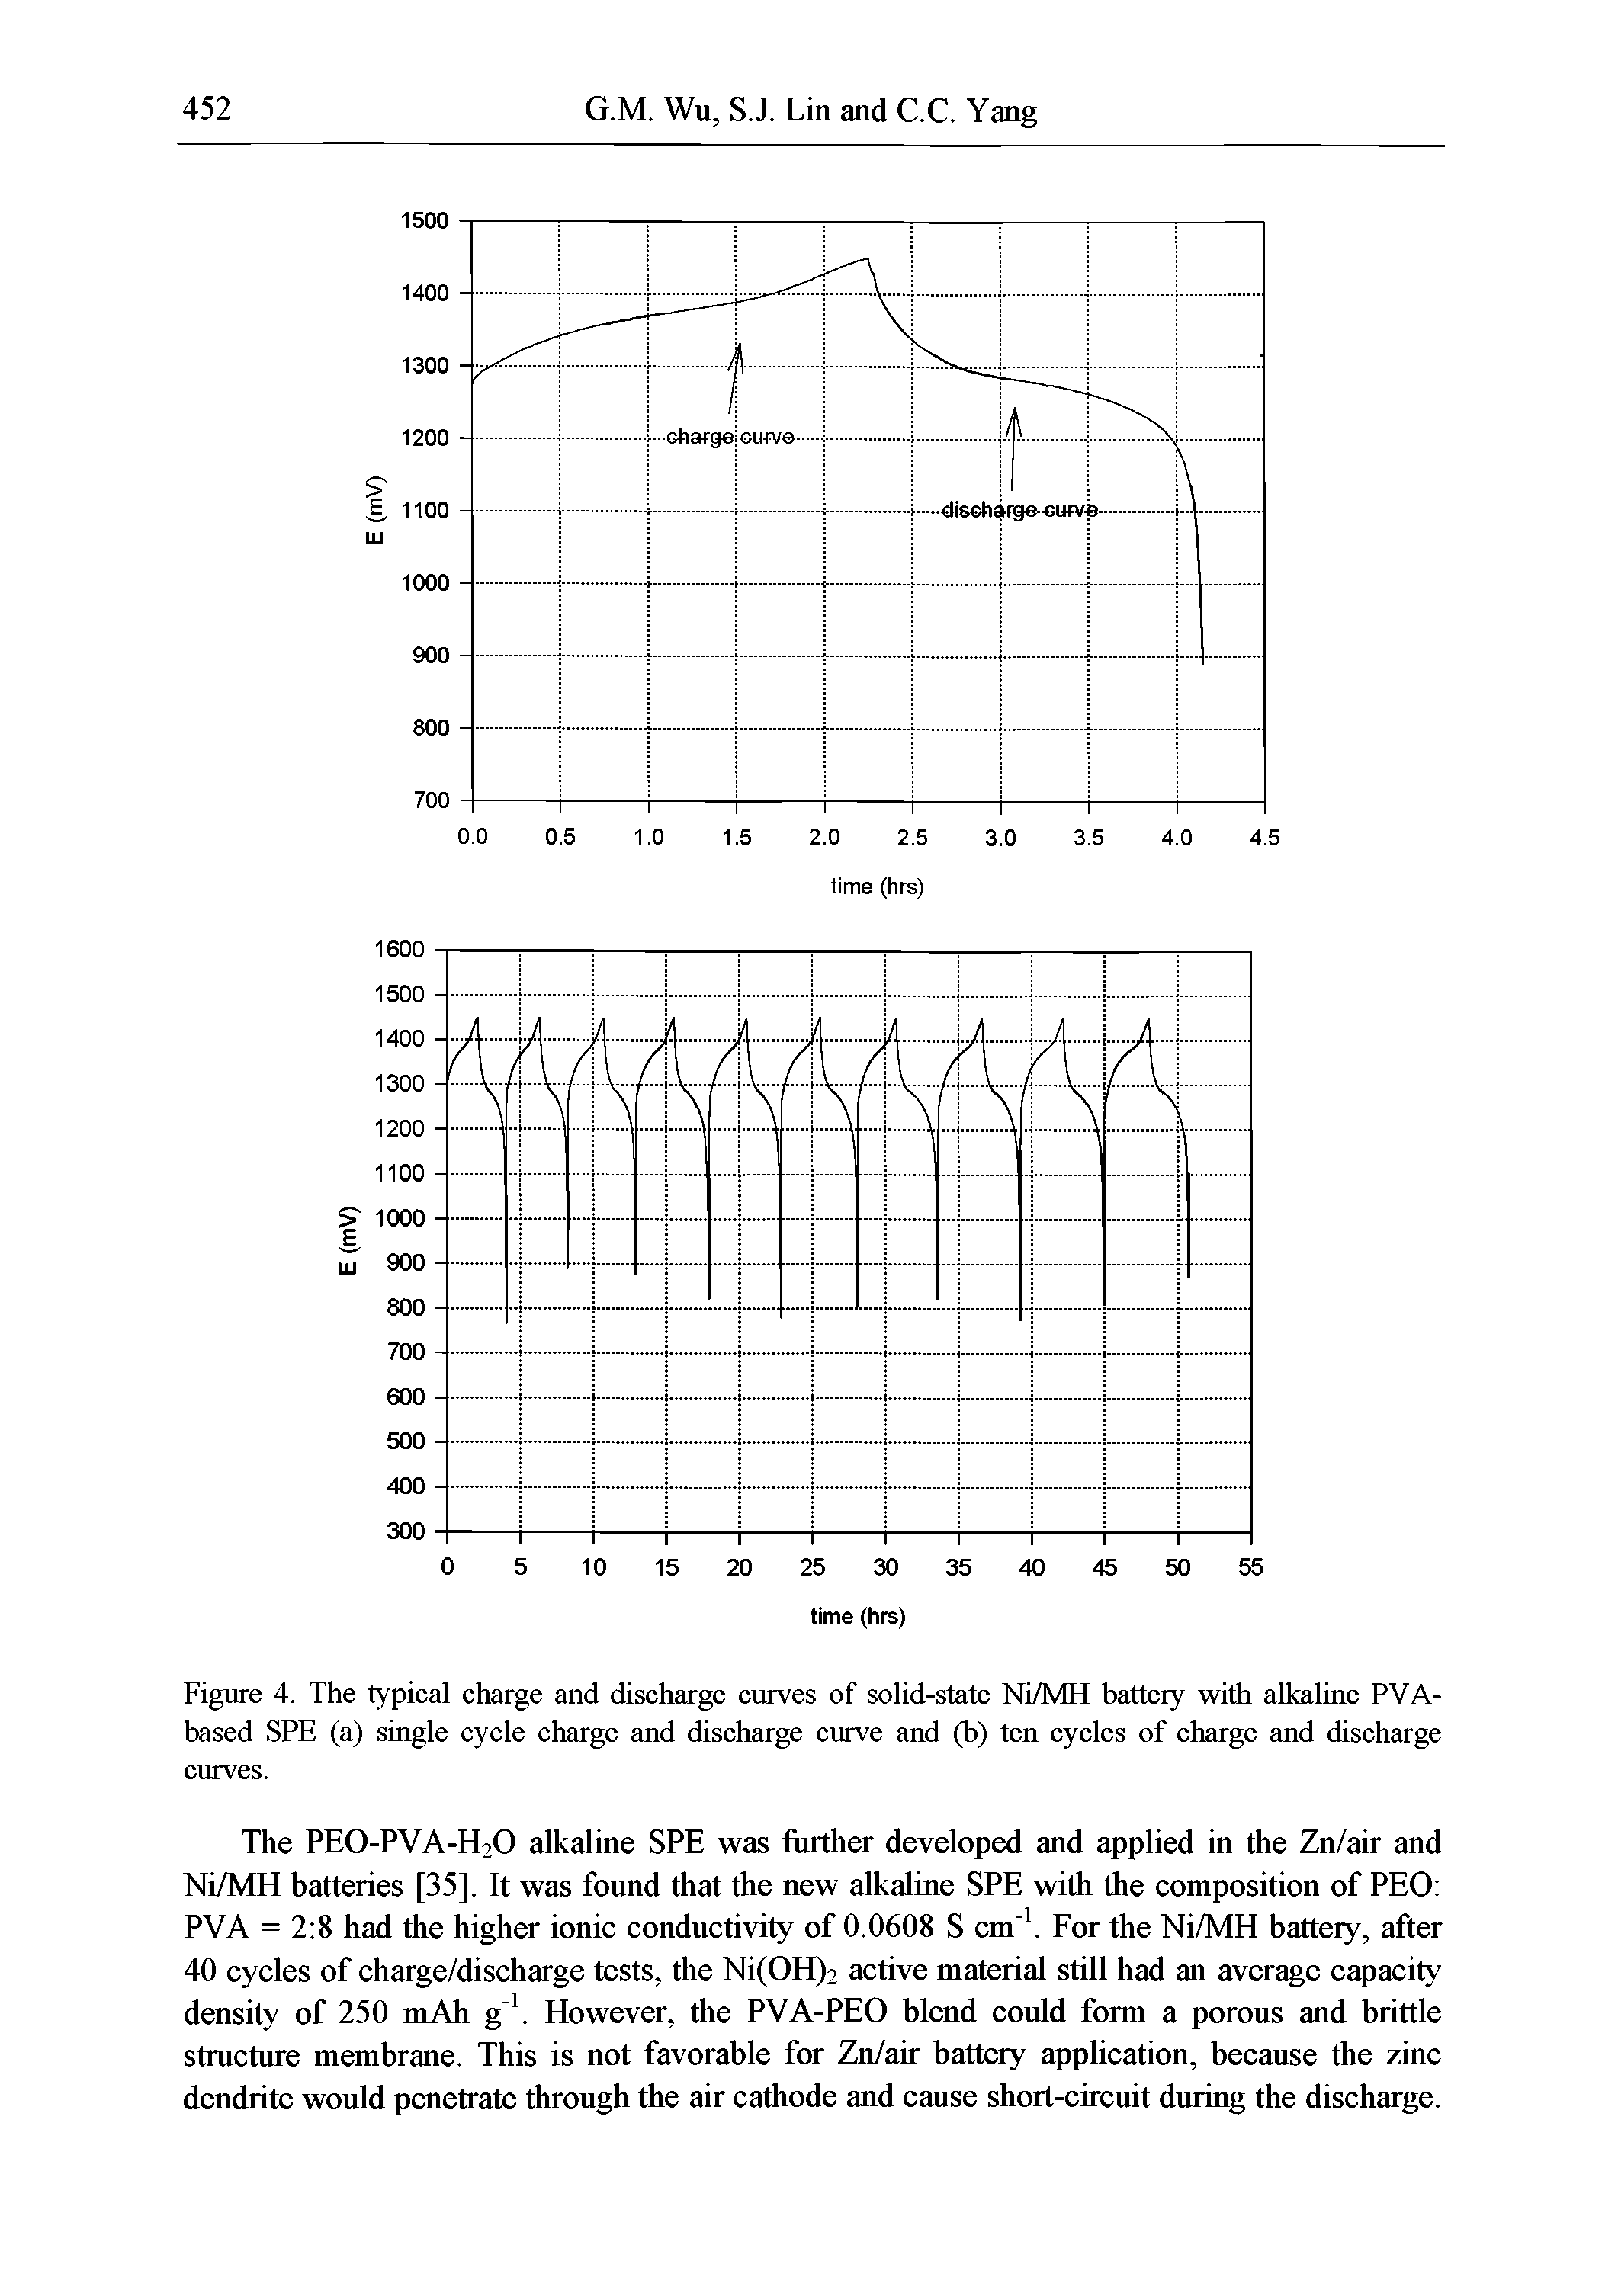 Figure 4. The typical charge and discharge curves of solid-state Ni/MH battery with alkahne PVA-based SPE (a) single cycle charge and discharge curve and (b) ten cycles of charge and discharge curves.